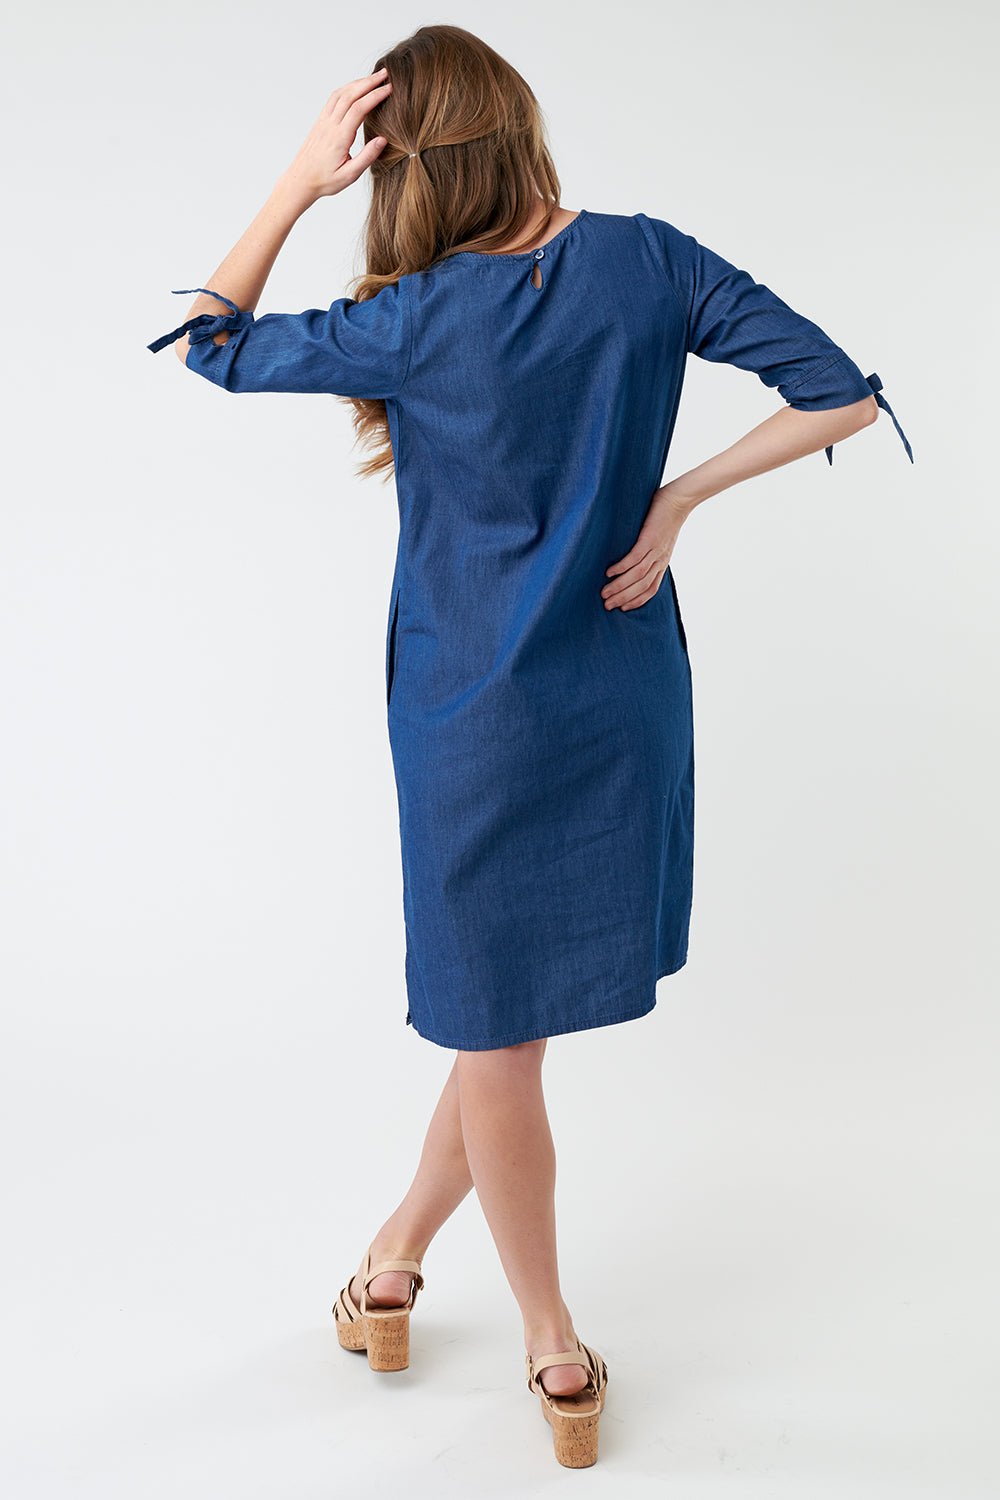 Nautical Denim Knee Length Dress in Sustainable Cotton Blue | Day Dresses |  Monsoon US.